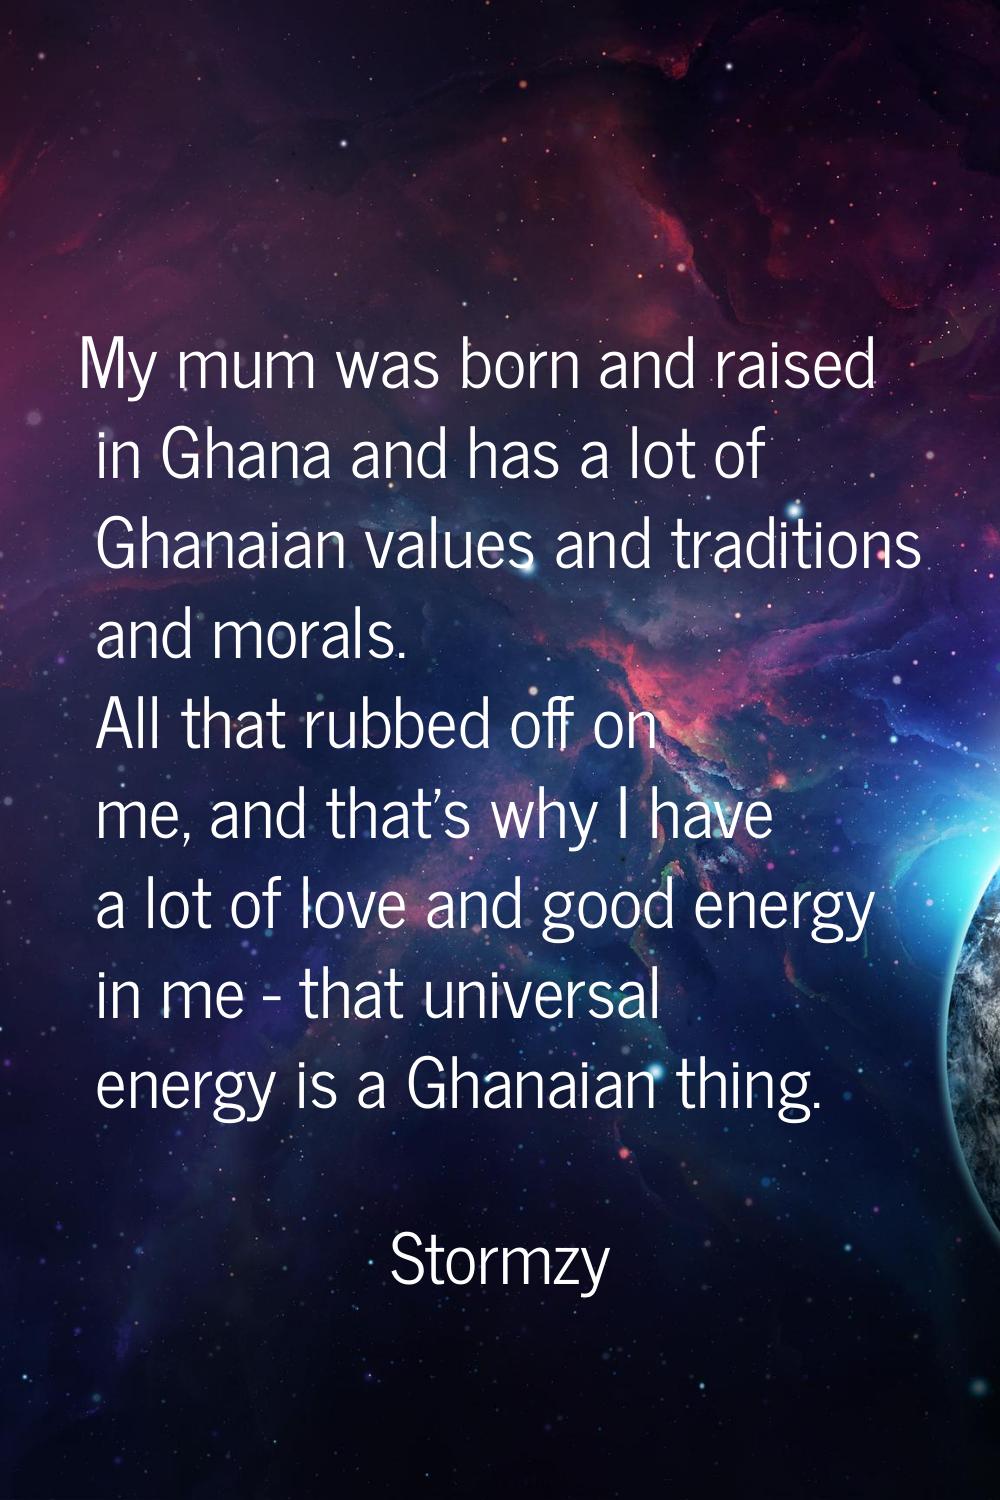 My mum was born and raised in Ghana and has a lot of Ghanaian values and traditions and morals. All